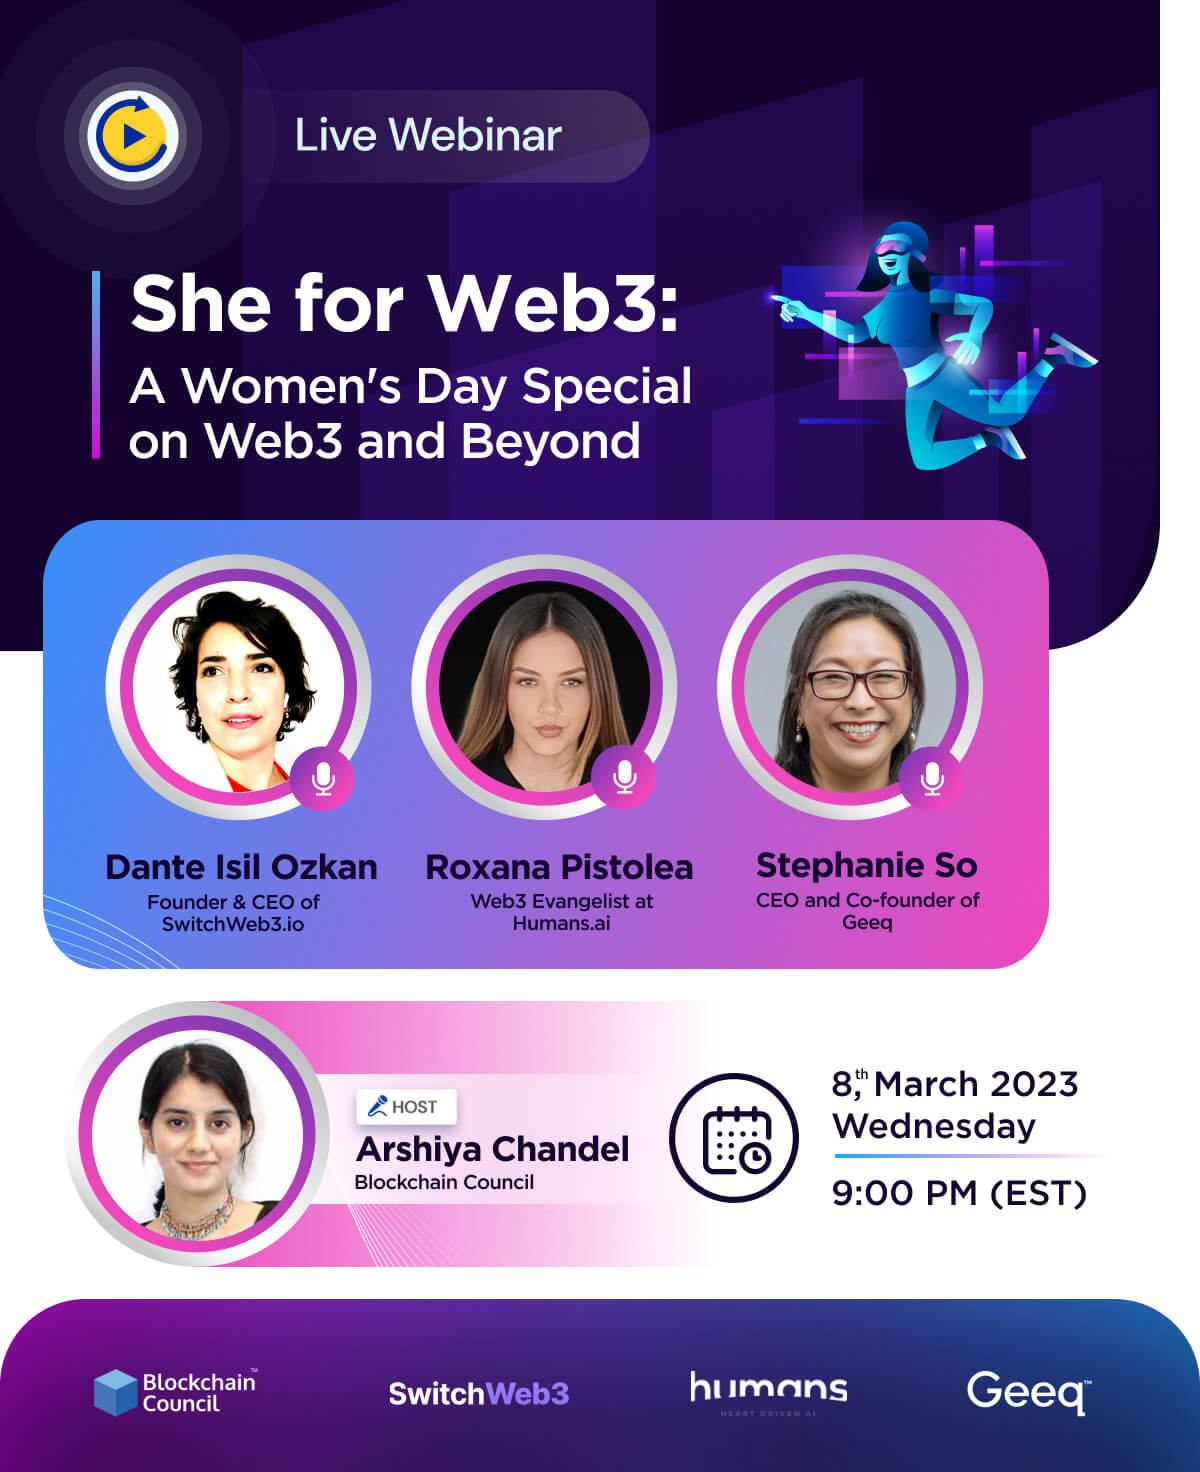 She for Web3: A Women's Day Special on Web3 and Beyond